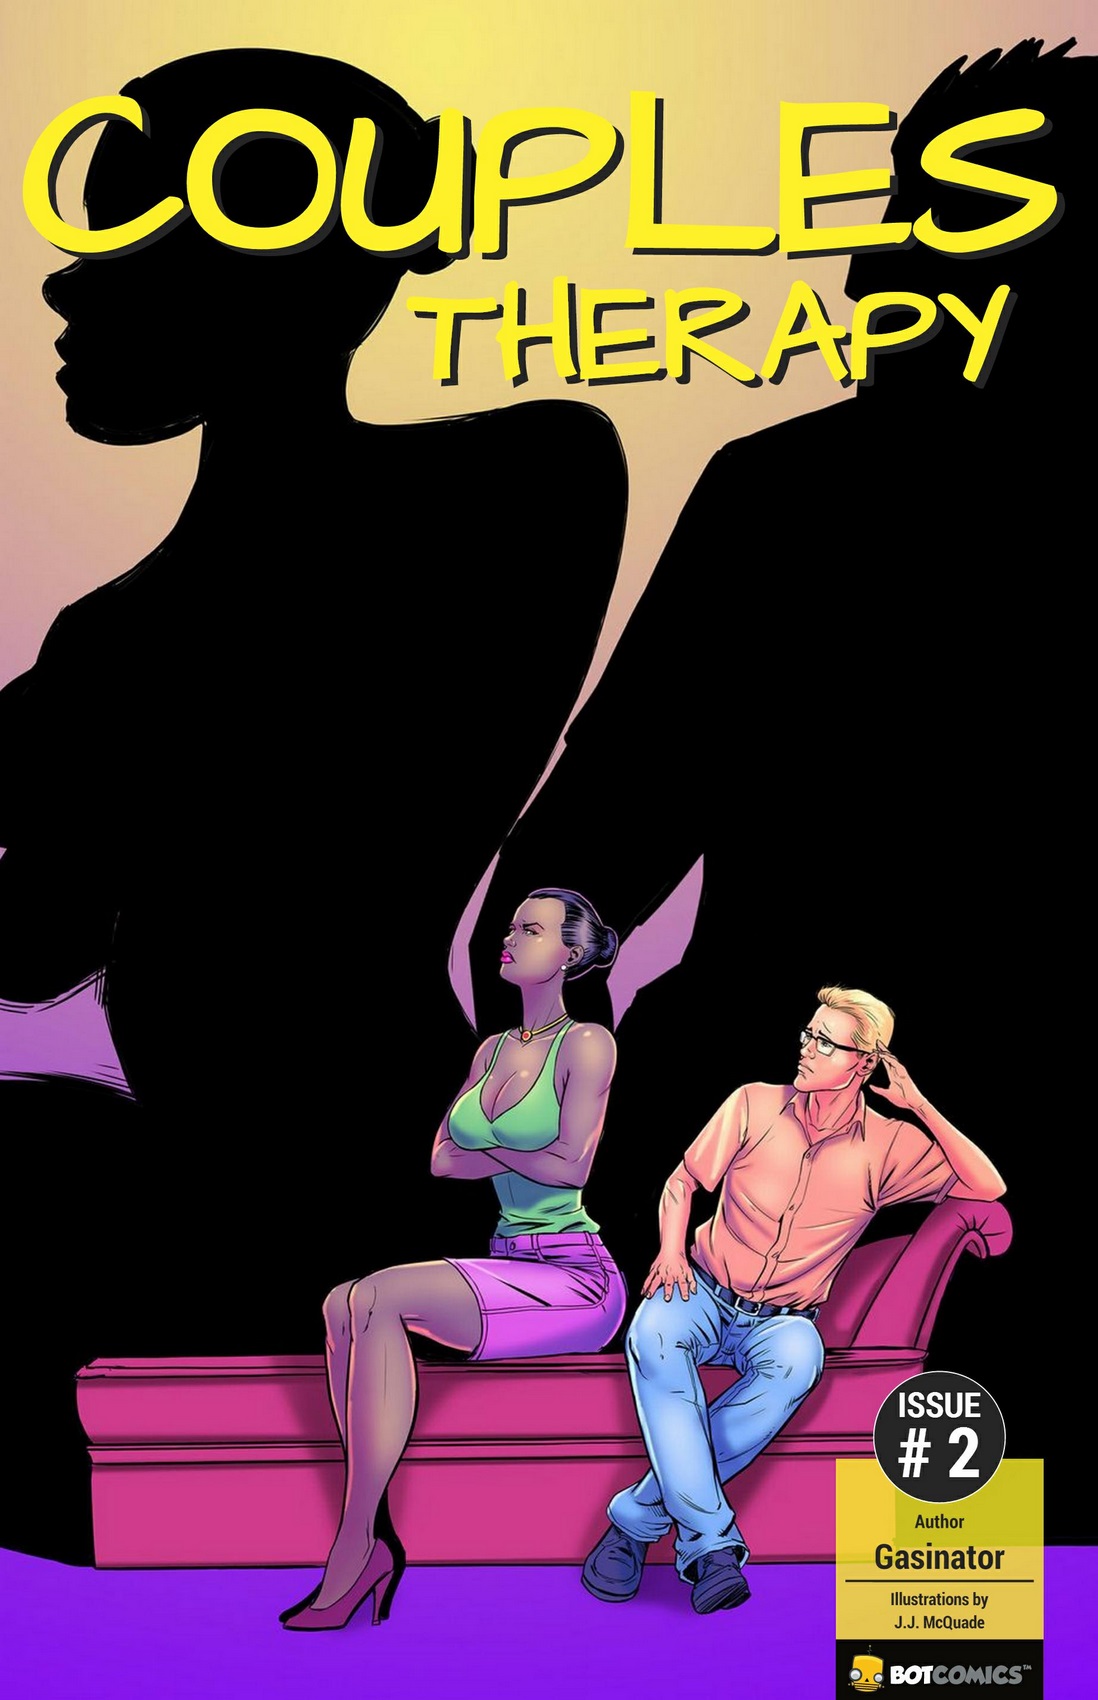 Couples Therapy Issue # 2- BotComics –